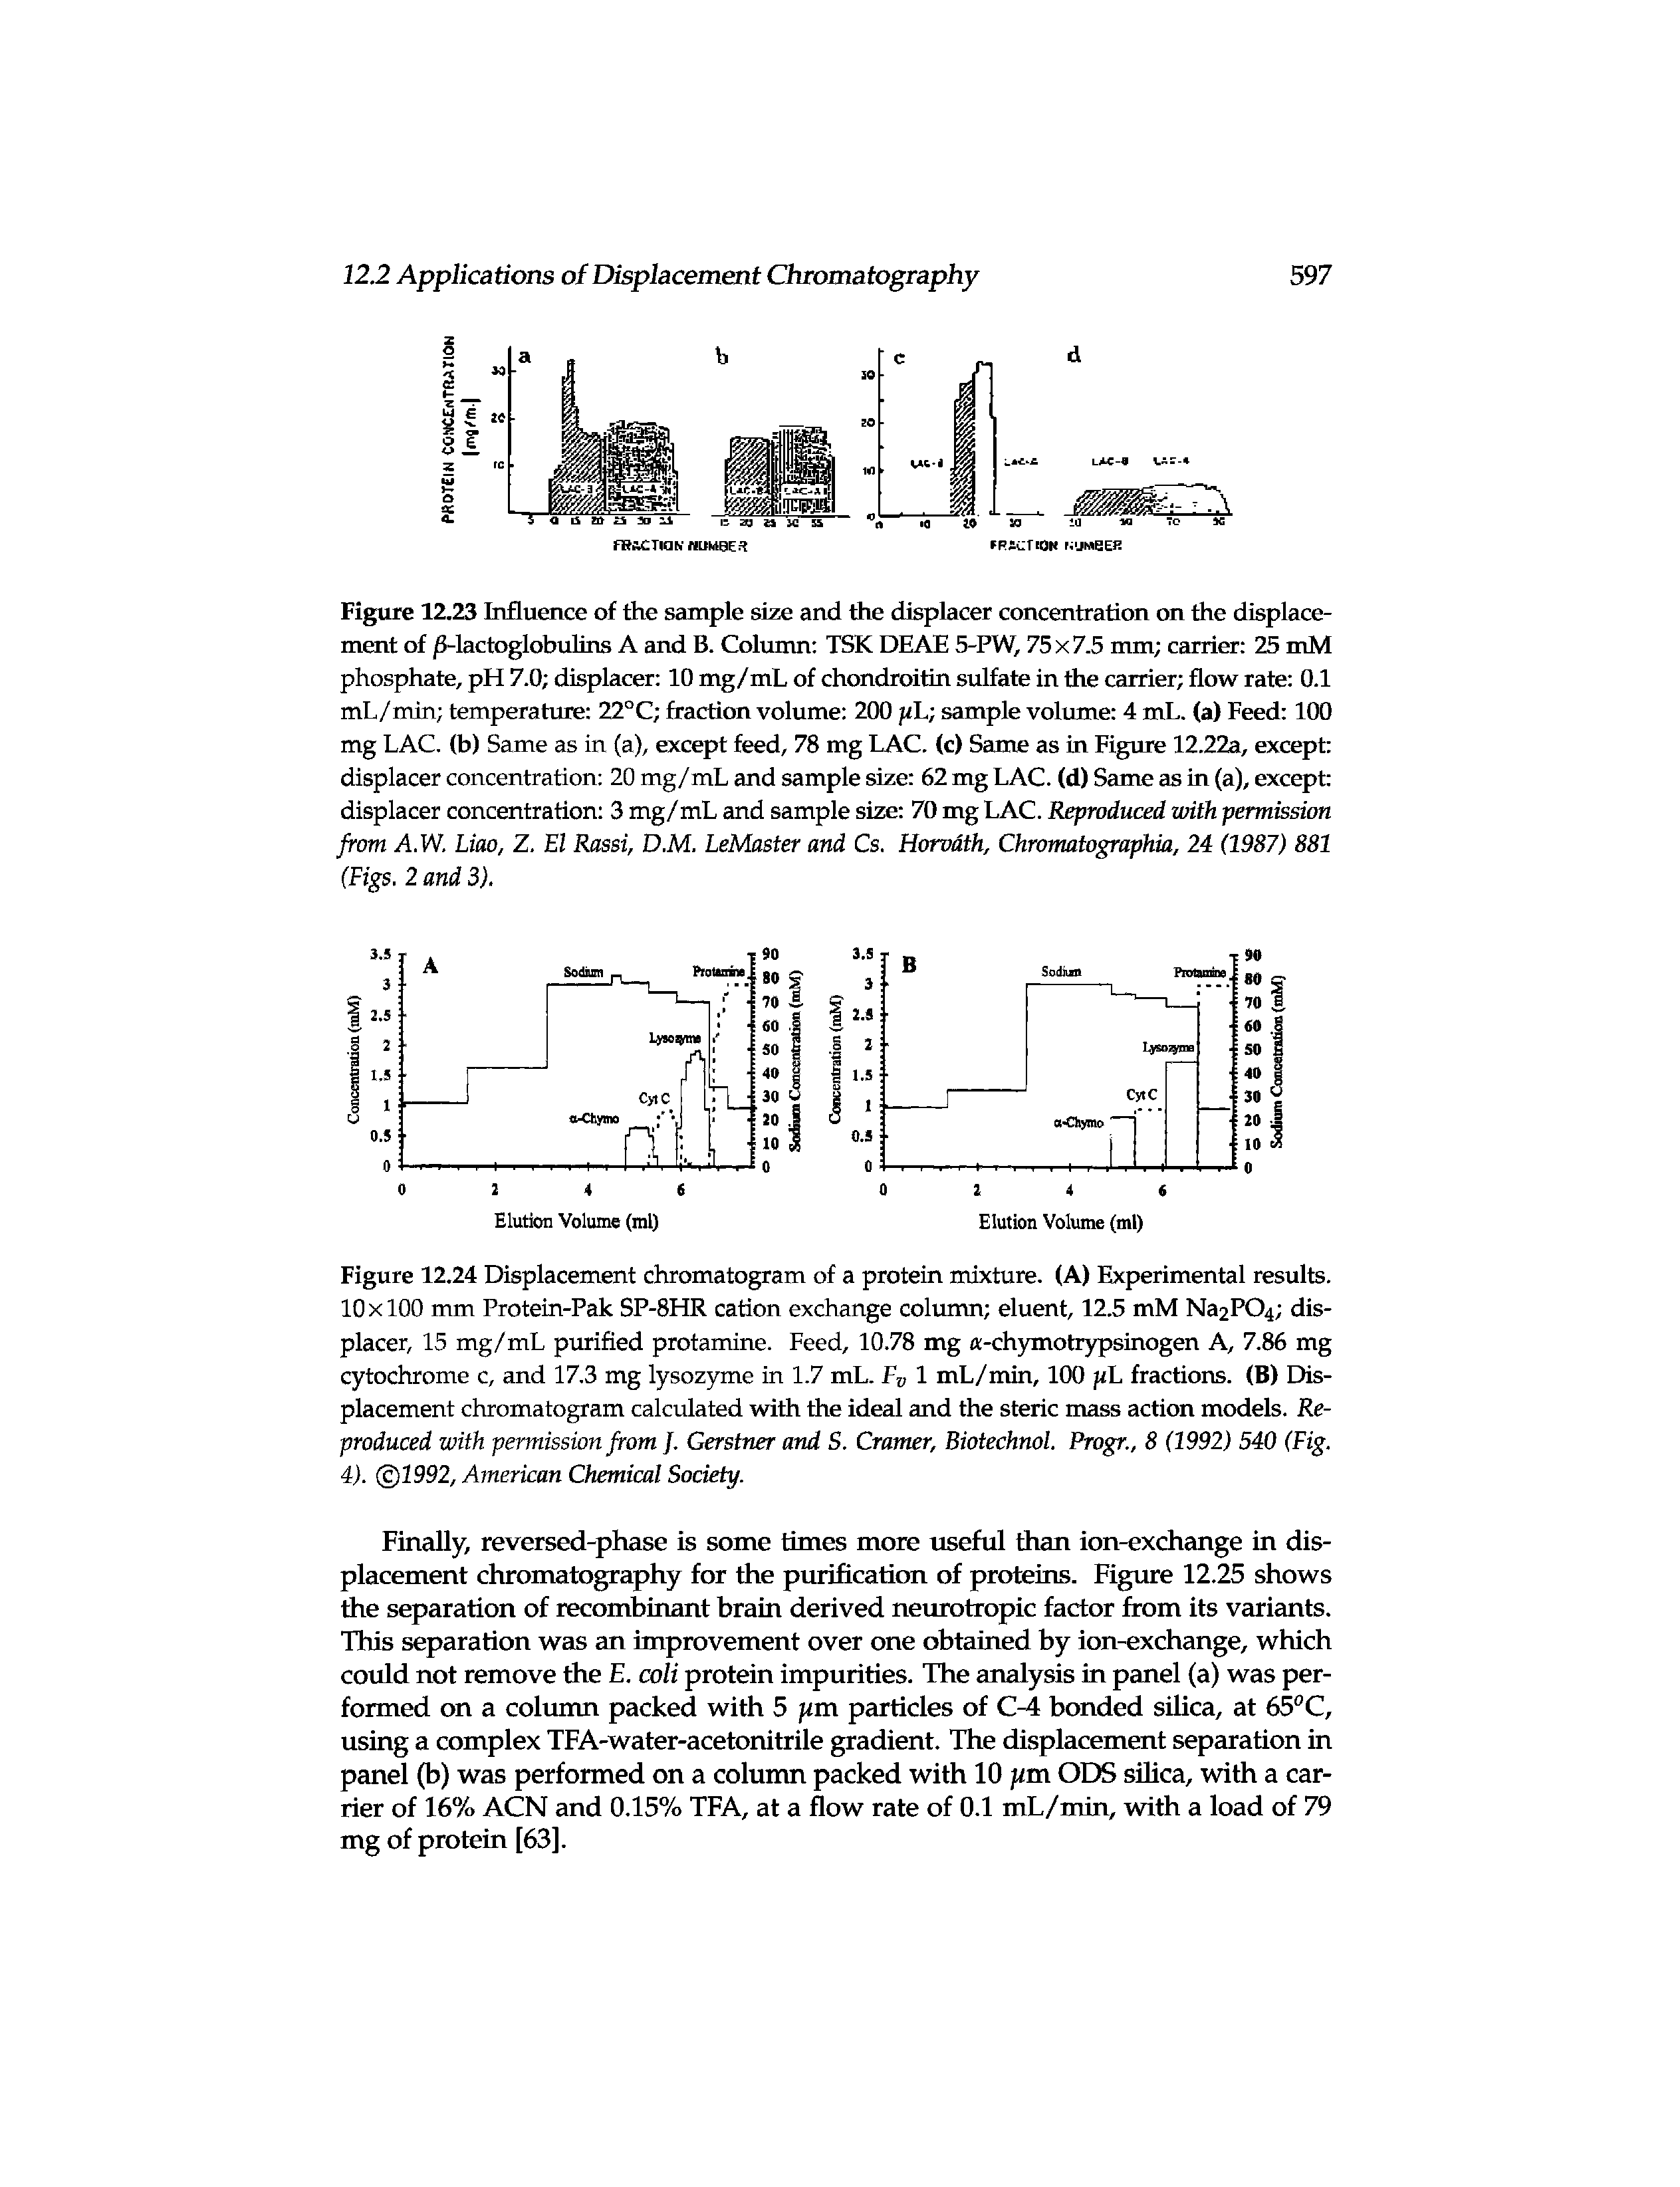 Figure 12.23 Influence of the sample size and the displacer concentration on the displacement of -lactoglobuhns A and B. Column TSK DEAE 5-PW, 75x7.5 mm carrier 25 mM phosphate, pH 7.0 displacer 10 mg/mL of chondroitm sulfate in the carrier flow rate 0.1 mL/min temperature 22°C fraction volume 200 jiL sample volume 4 mL. (a) Feed 100 mg LAC. (b) Same as in (a), except feed, 78 mg LAC. (c) Same as in Figure 12.22a, except displacer concentration 20 mg/mL and sample size 62 mg LAC. (d) Same as in (a), except displacer concentration 3 mg/mL and sample size 70 mg LAC. Reproduced with permission from A.W. Liao, Z. El Rossi, D.M. LeMaster and Cs. Horvath, Chromatographia, 24 (1987) 881 (Figs. 2 and 3).